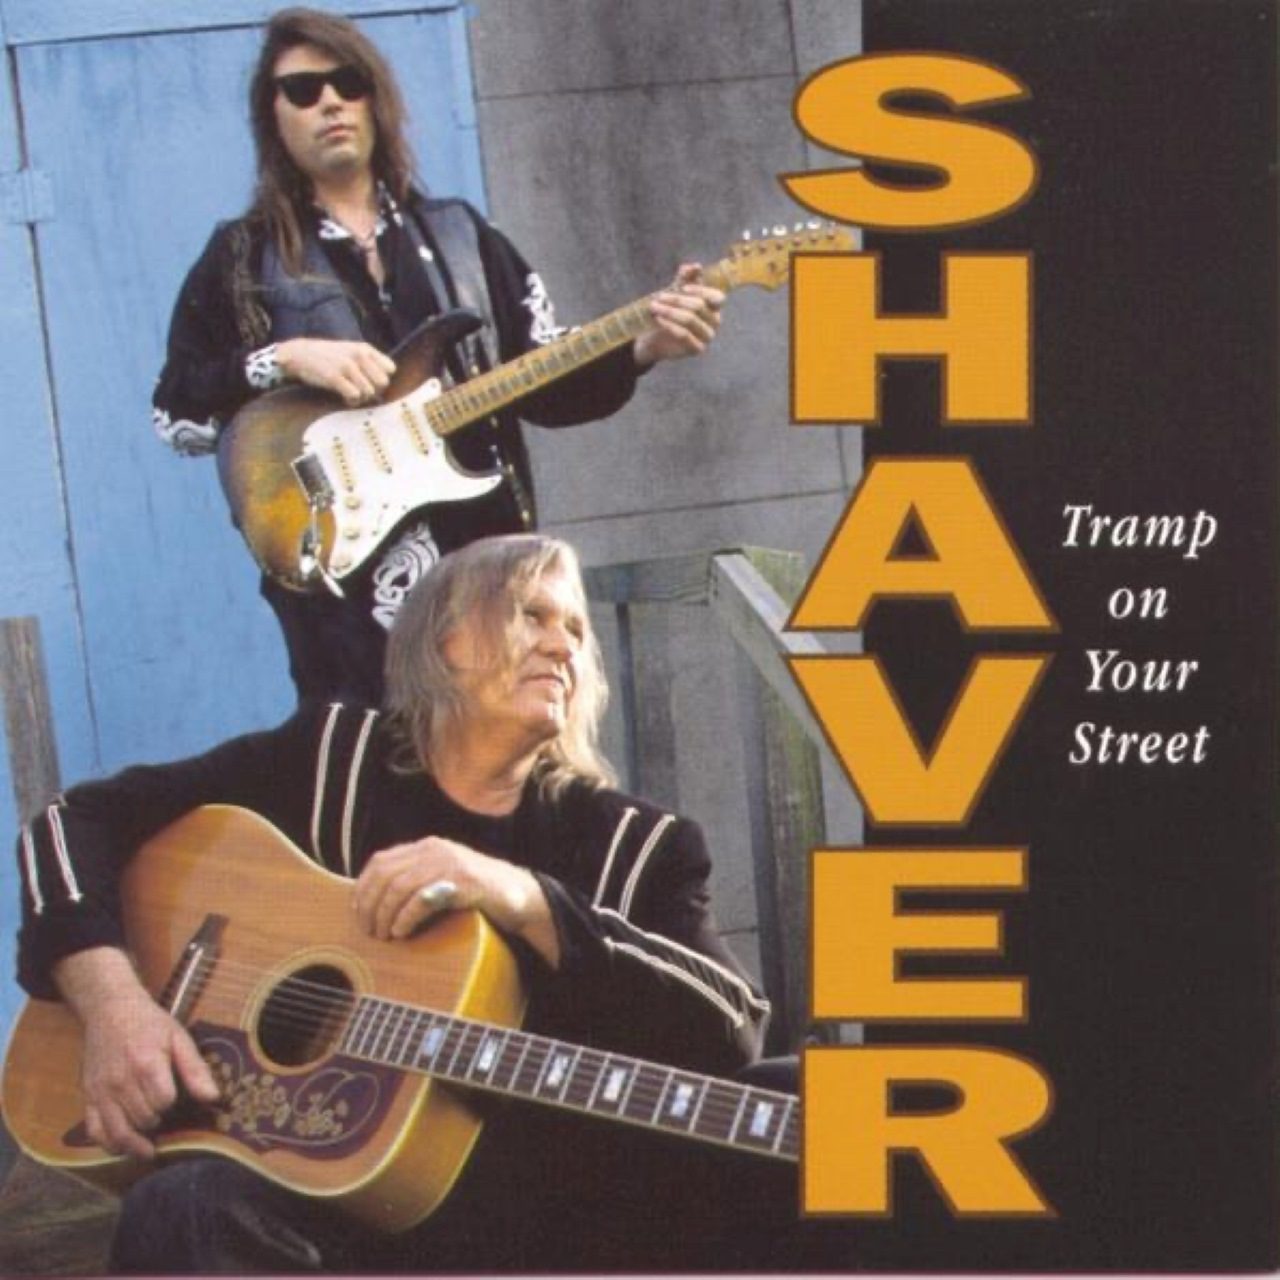 Billy Joe Shaver – Tramp On Your Street cover album